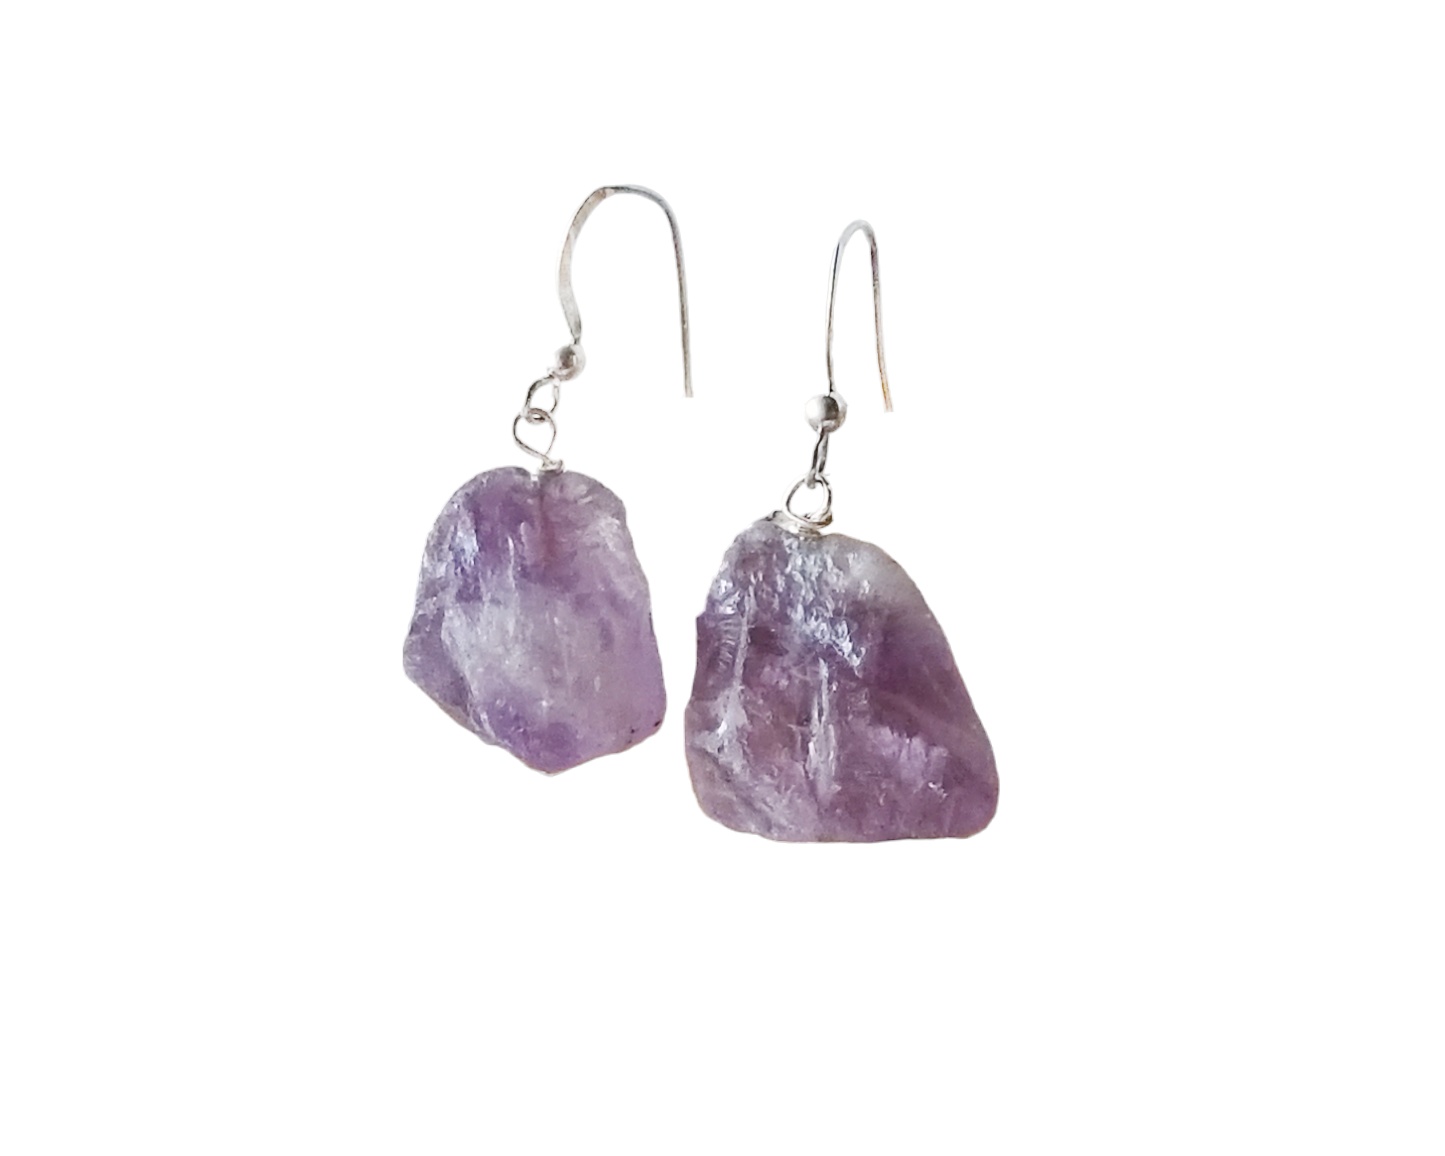 Amethyst Peace Nugget Earrings made with Sterling Silver &Rough Natural Amethyst Nuggets, Purple, Lavender Gemstones.